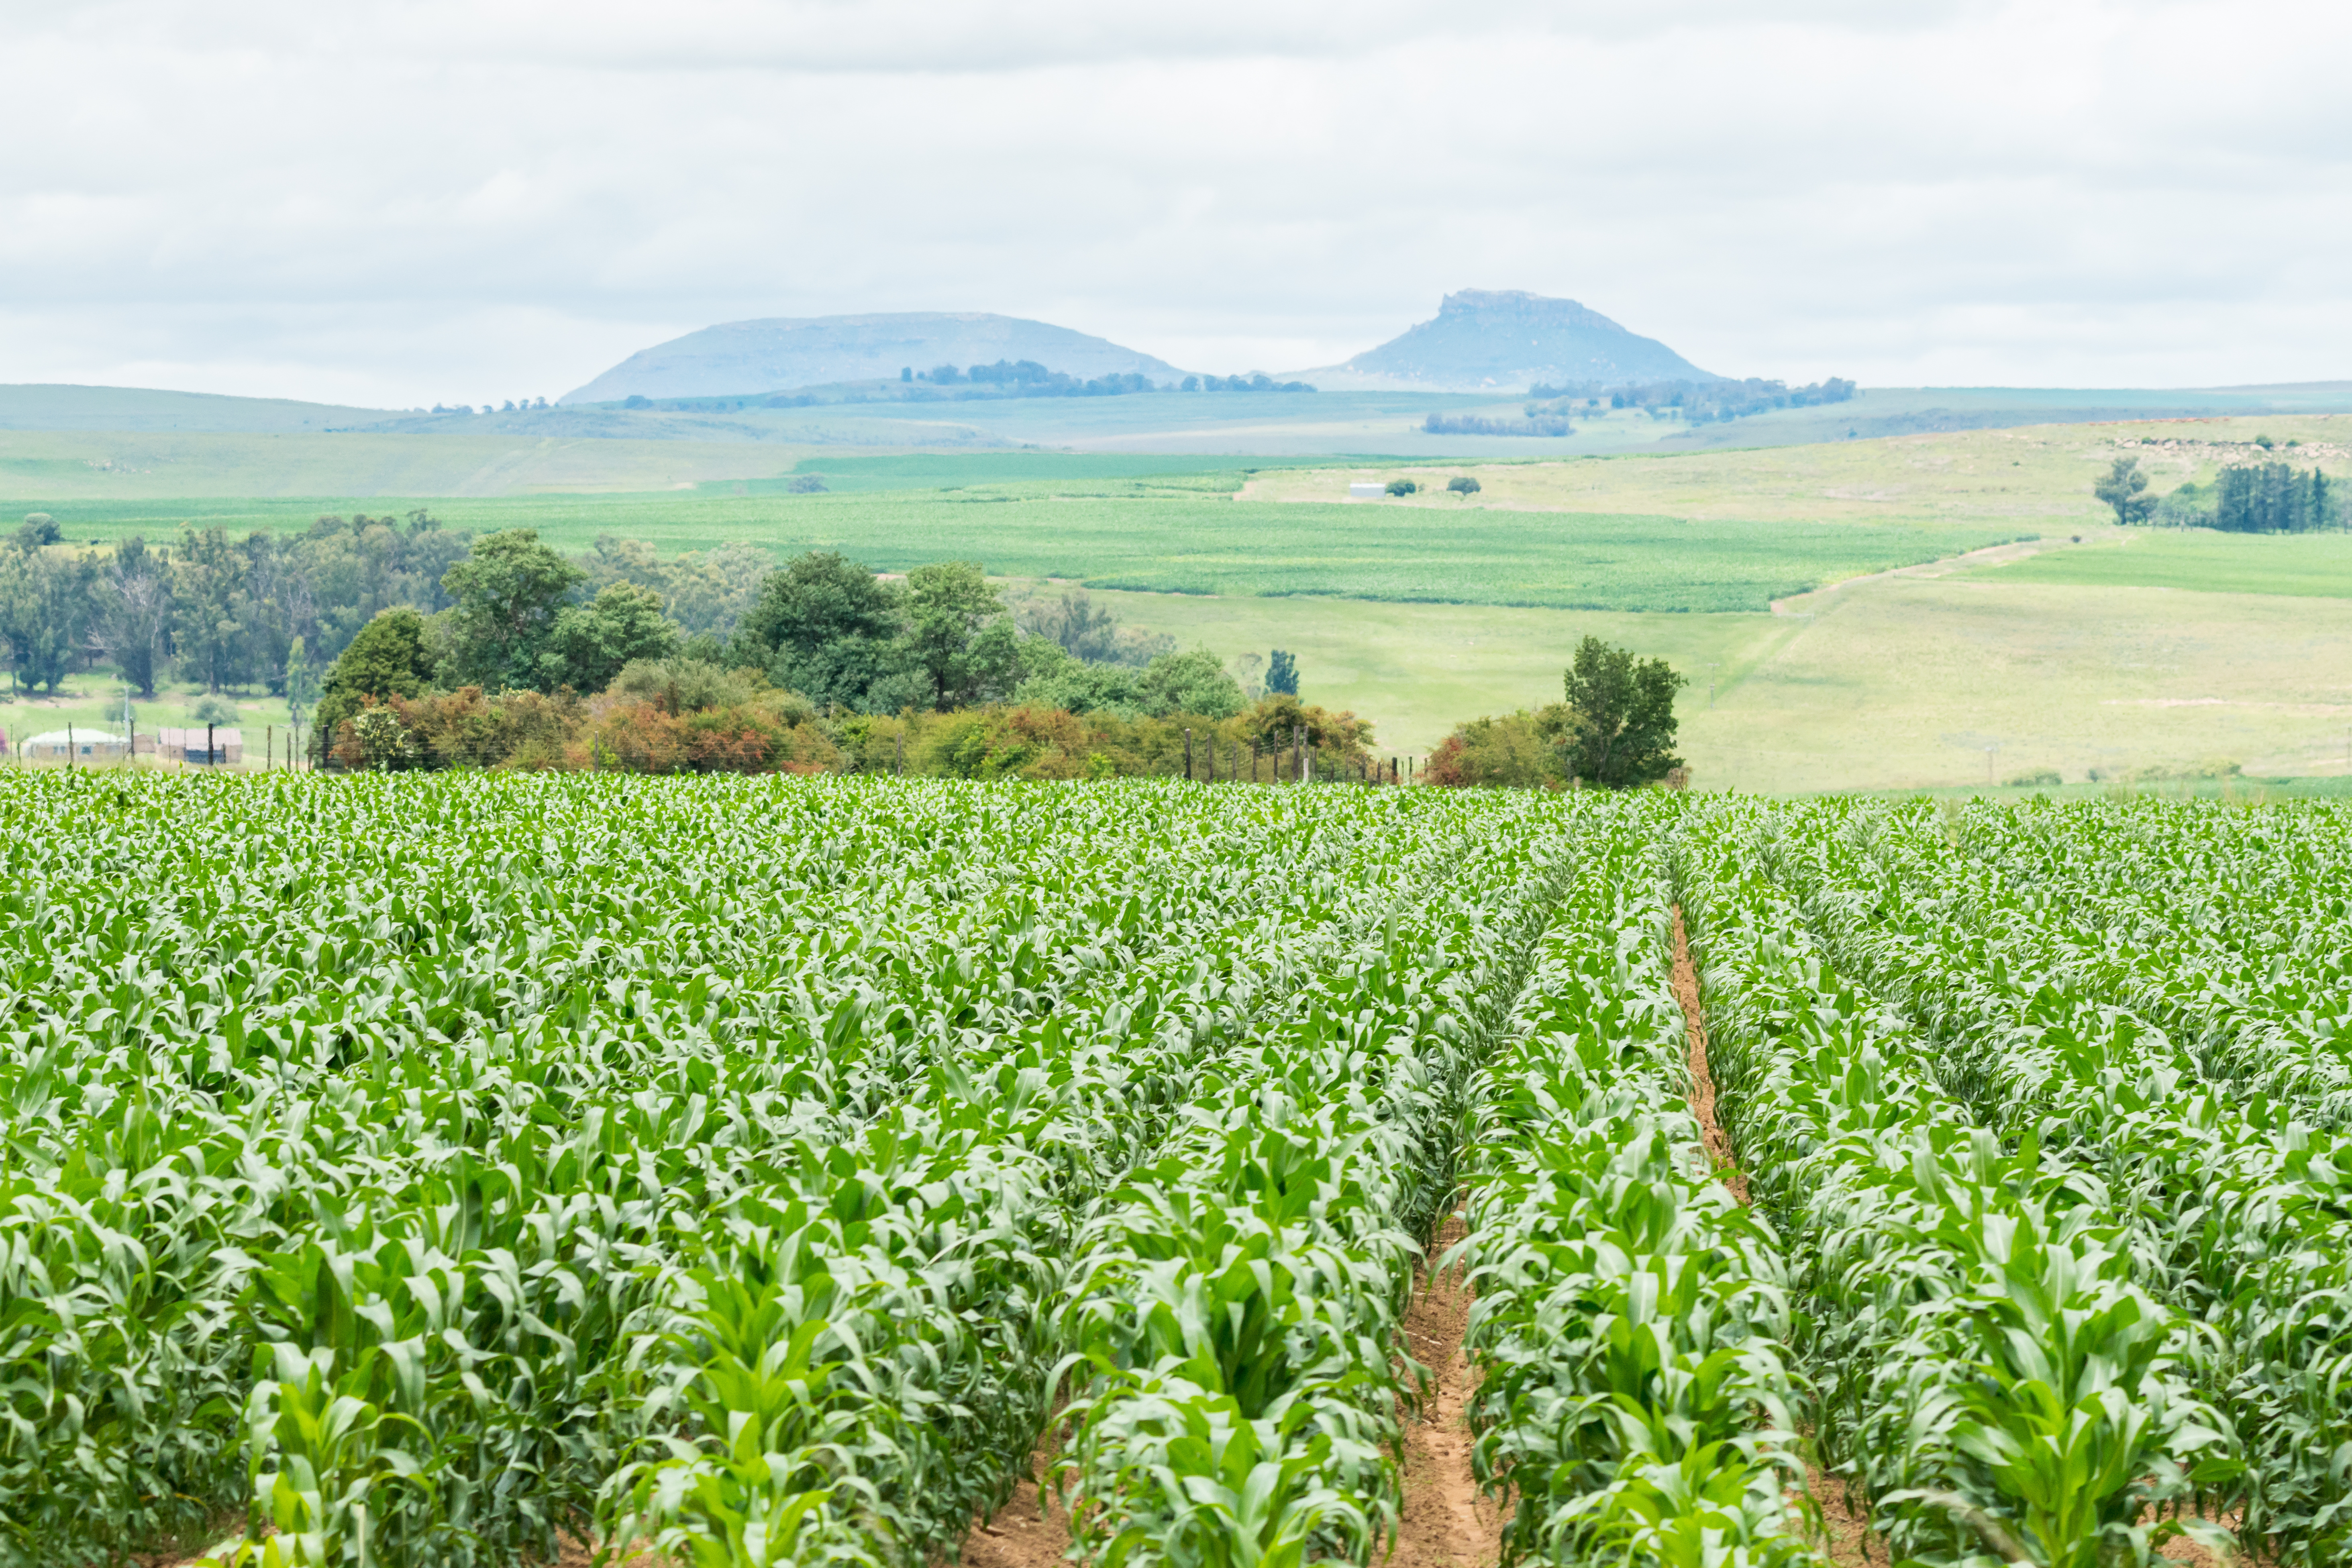 COFCO International has a direct partnership with more than 40 farms around the country which together represent the single biggest crop production unit in South Africa. The cooperation incentivises producers and COFCO International to work together to reduce costs and boost production efficiencies. 